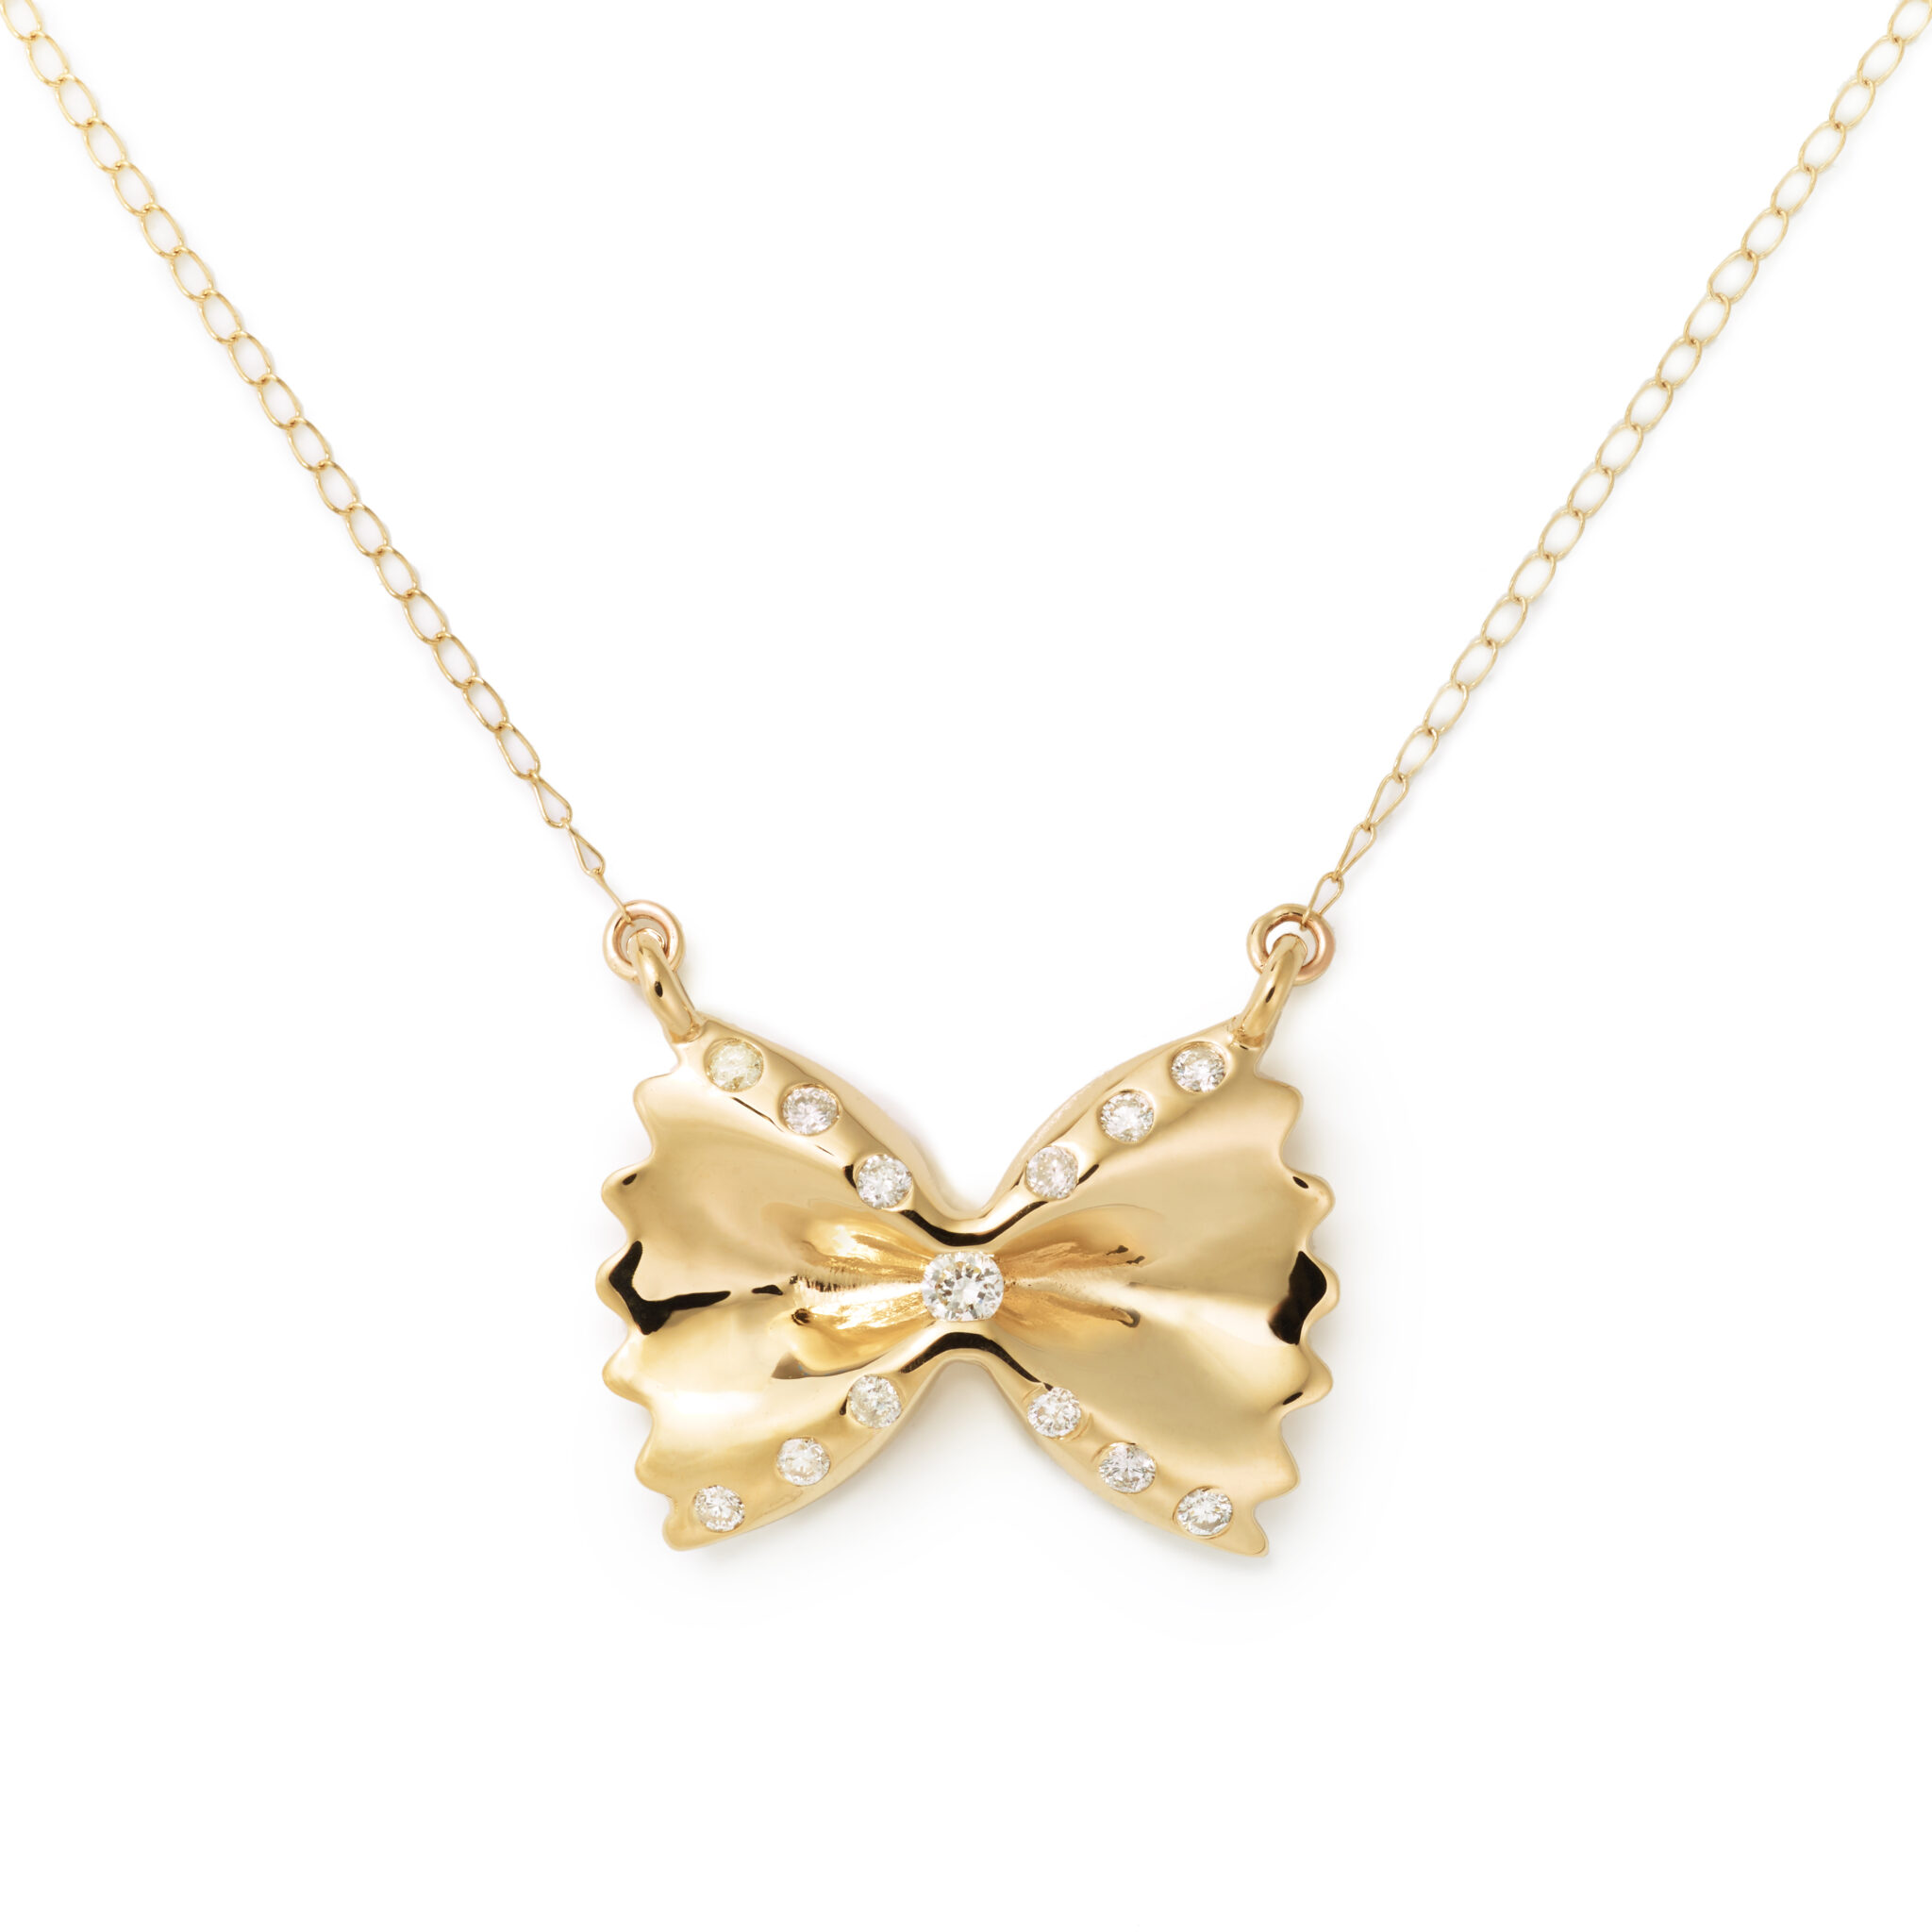 Farfalle Necklace, 14K Gold and Diamond